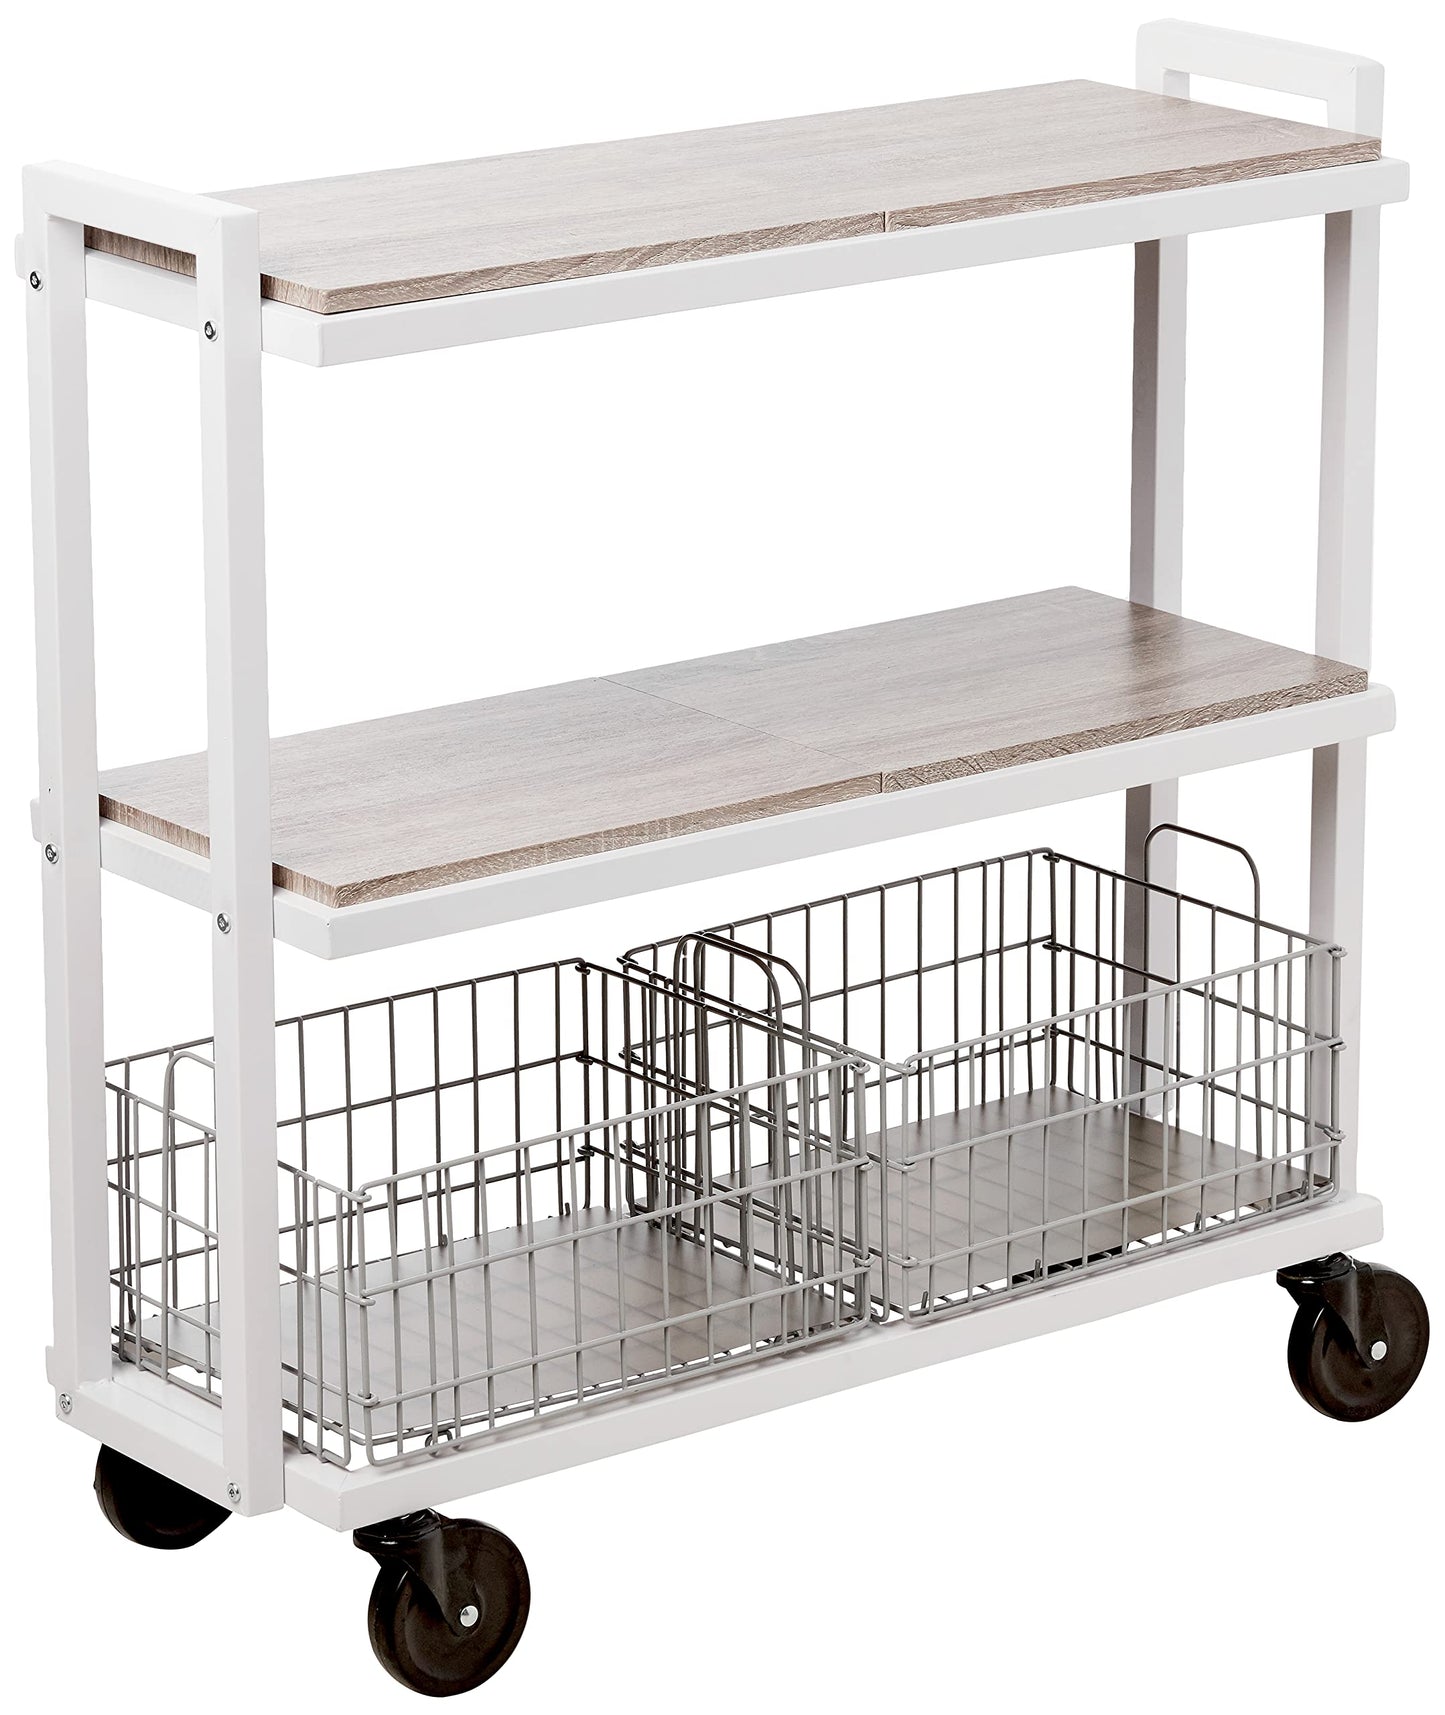 Atlantic Modular Mobile Storage Cart System, with Interchangeable Shelves & Baskets, Powder-Coated All-Steel Frame, 3-Tier, Caster Wheels for Mobility, PN 23350328, in White